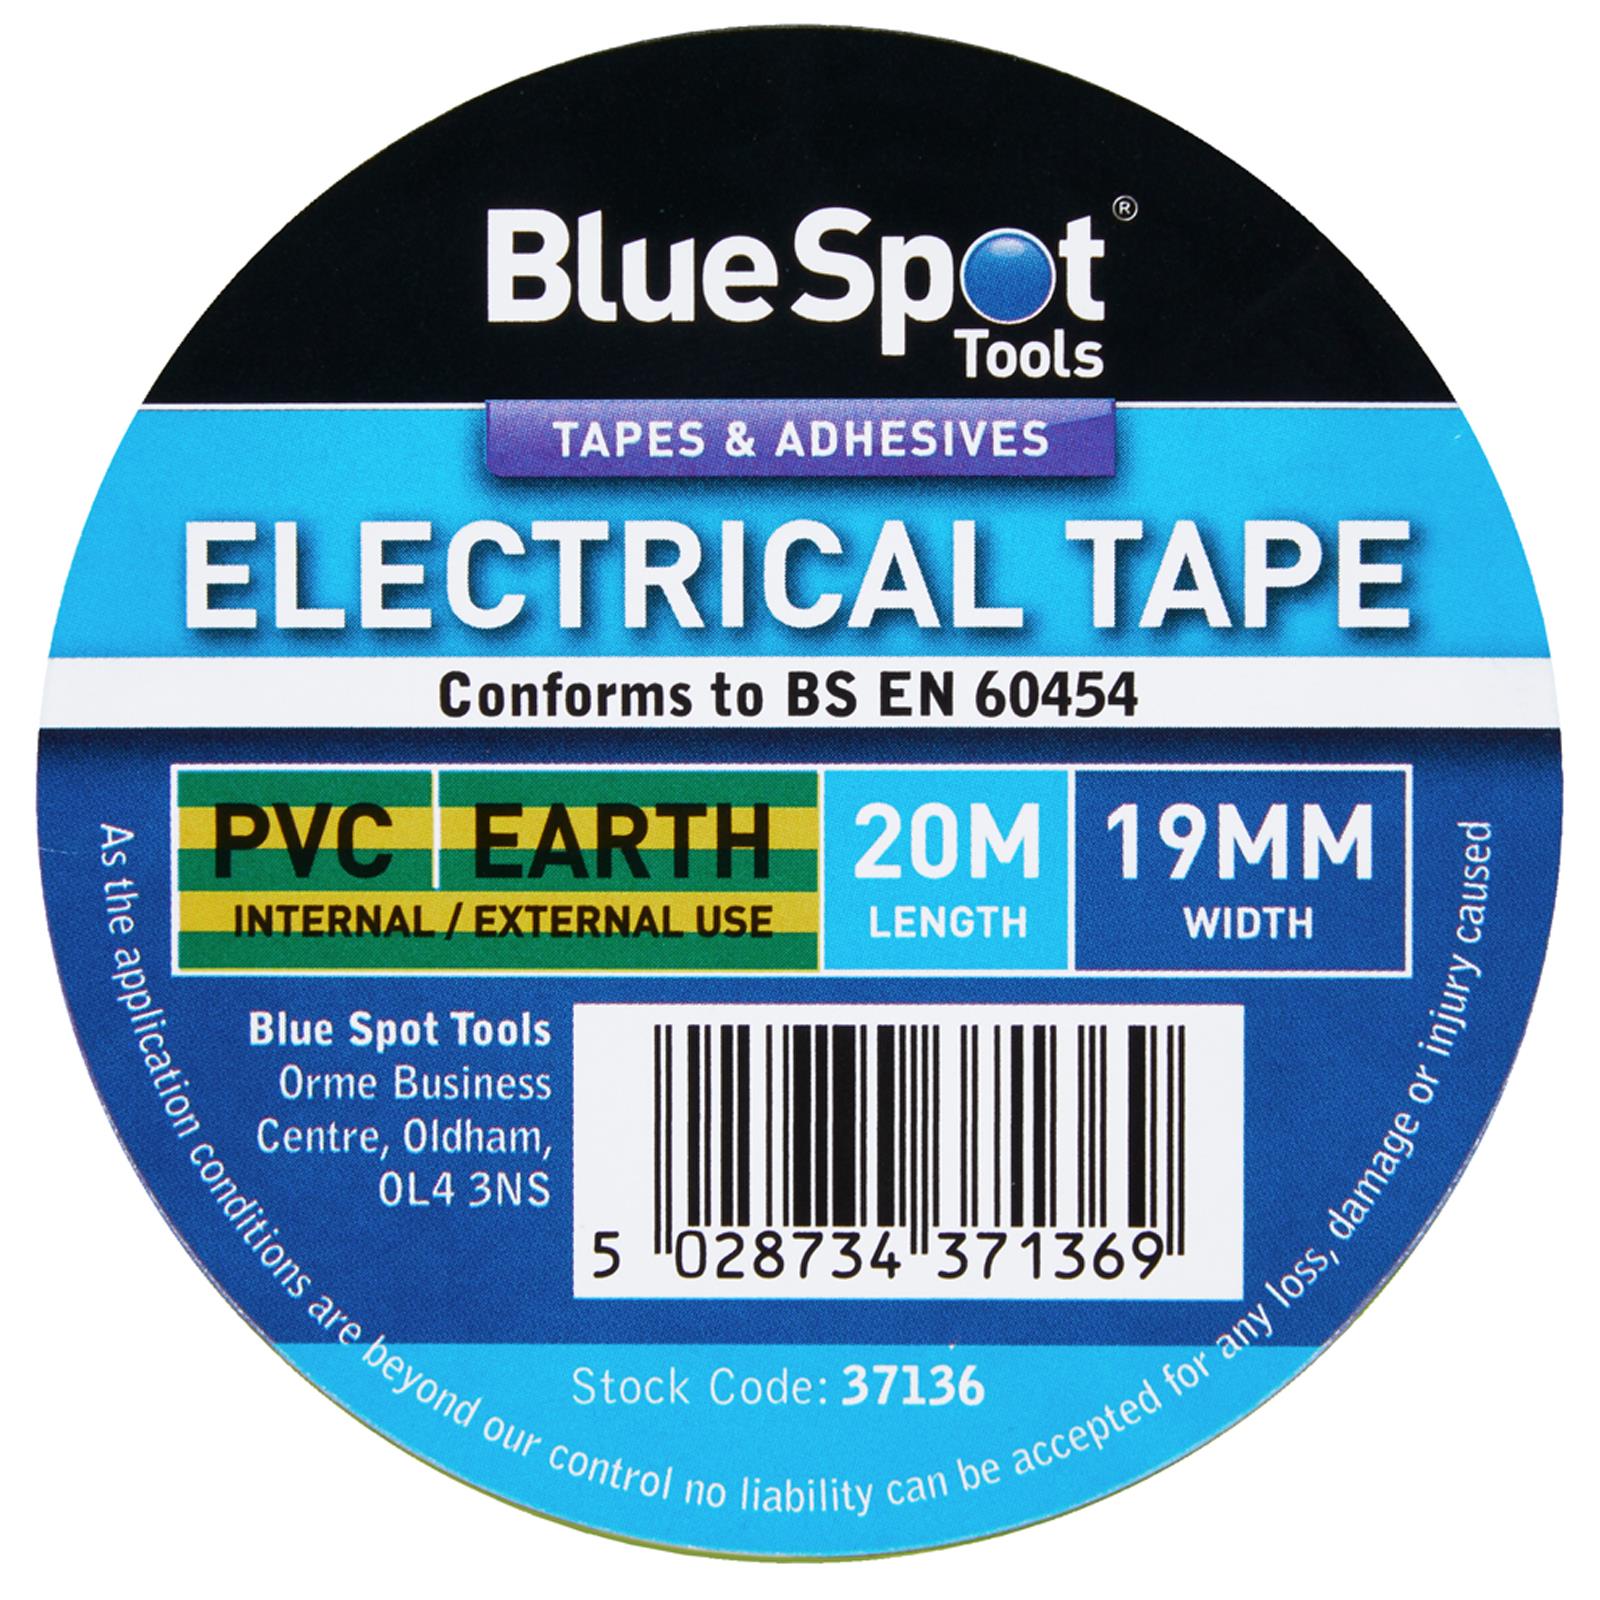 BlueSpot Electrical Insulation Tape Earth (Yellow and Green) PVC 19mm x 20m